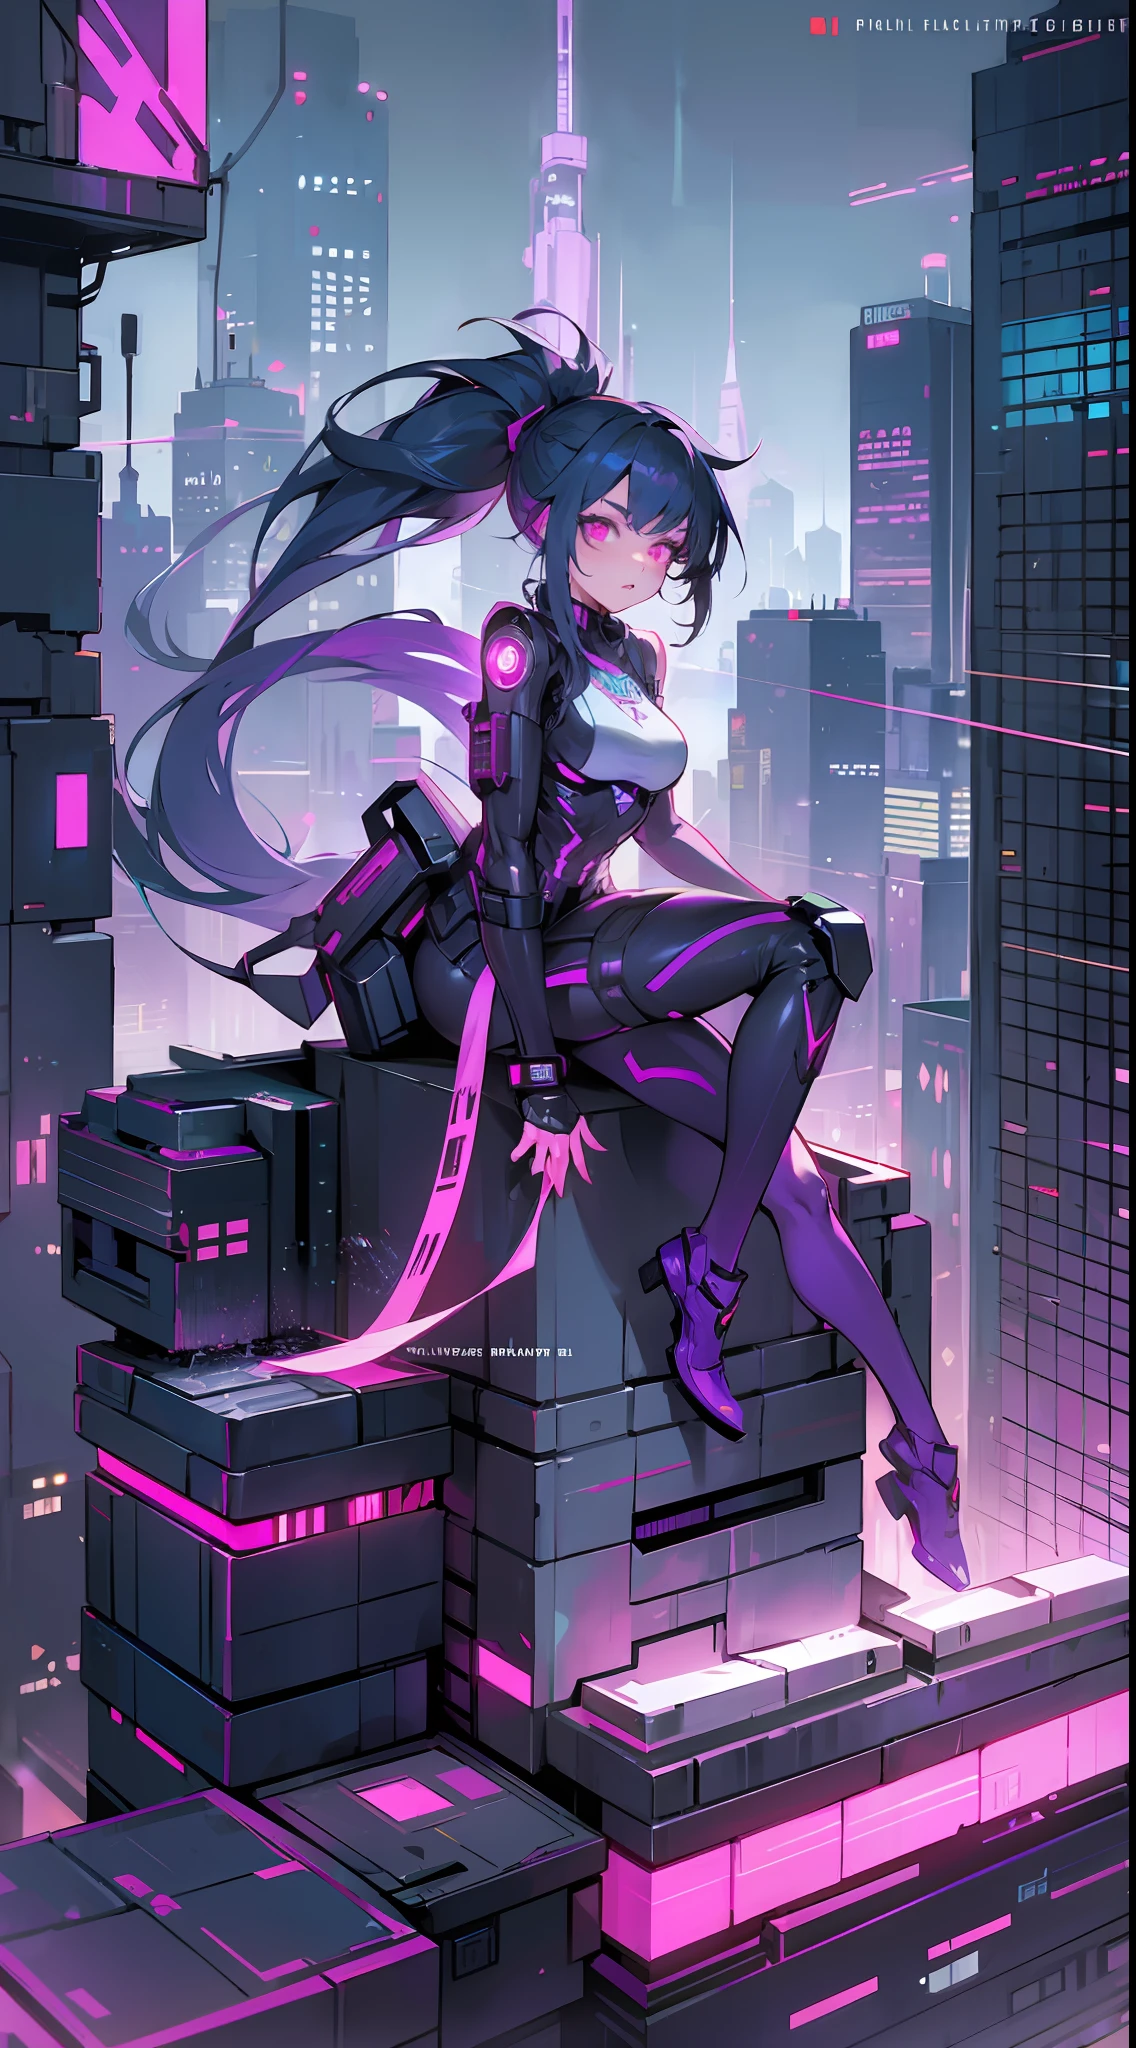 On rooftop, (cyberpunk theme) stunning Girl, cyber purple armor, ponytail, mechanic tail, glowing eyes, amazing city view, brilliant circuits, flying car, night, immersive scenery